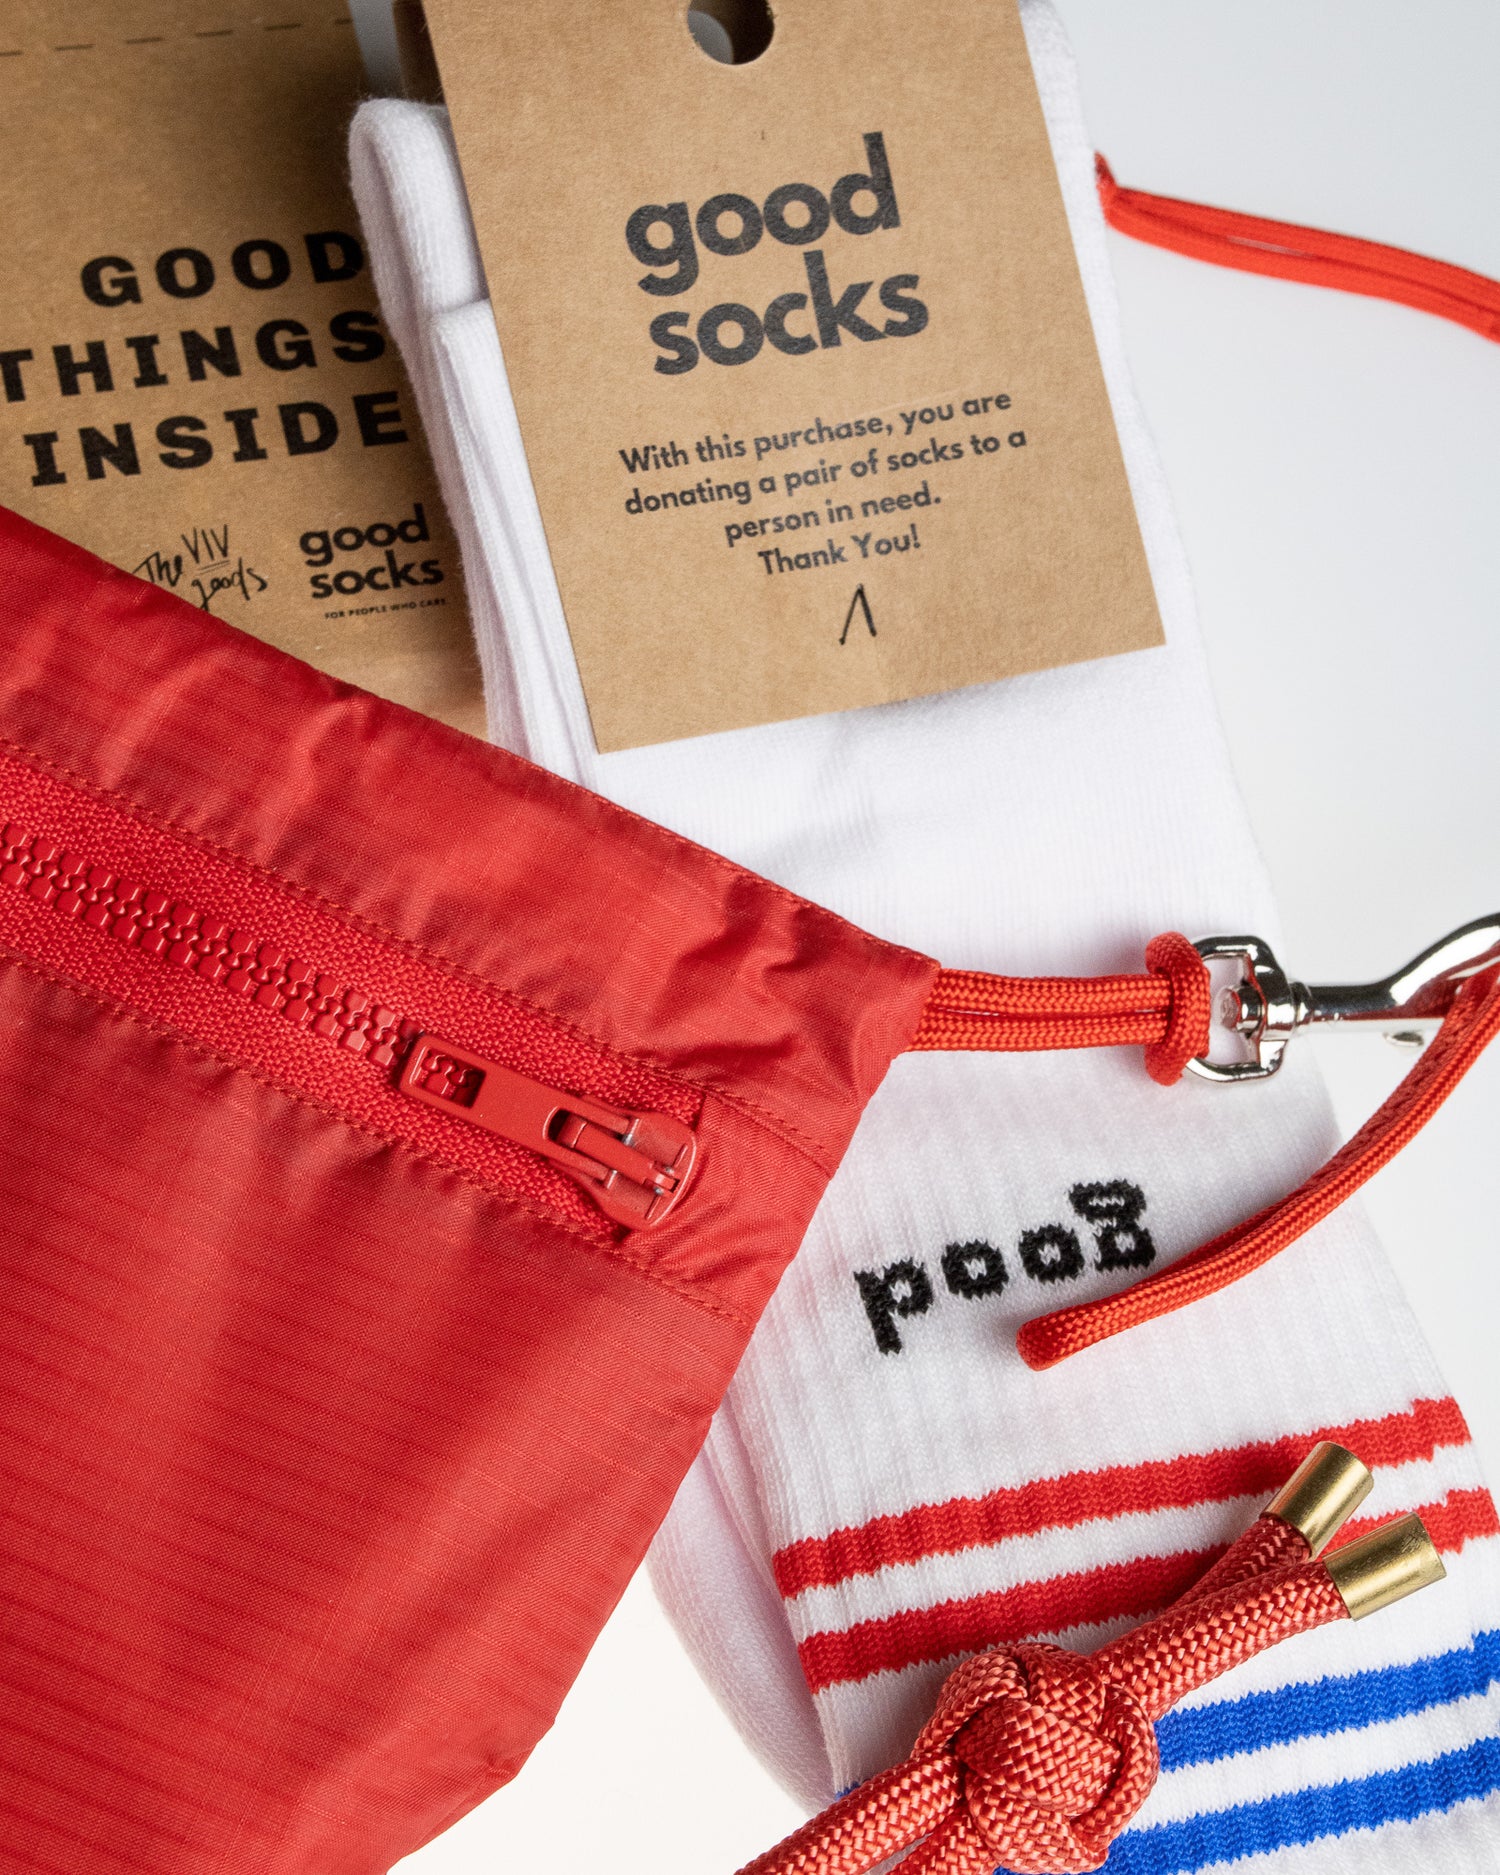 solid red U.BAG with good socks brand socks and red rope keychain